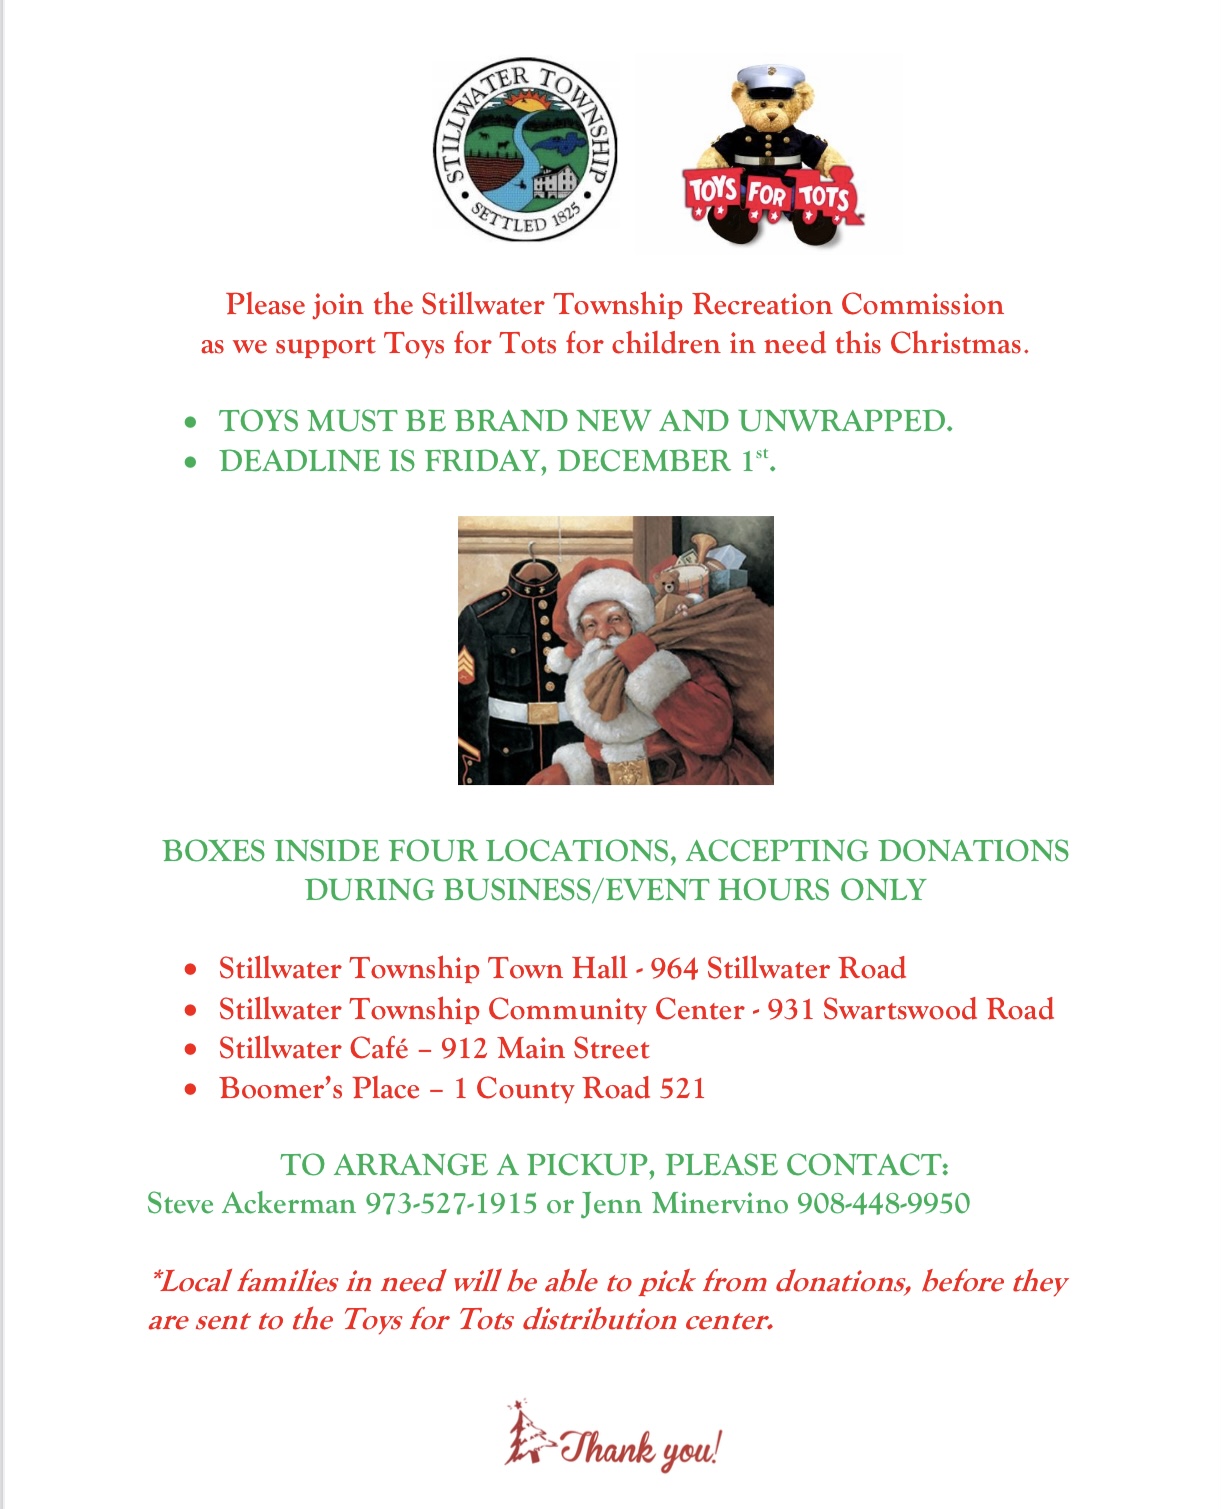 Toys For Tots Stillwater Township